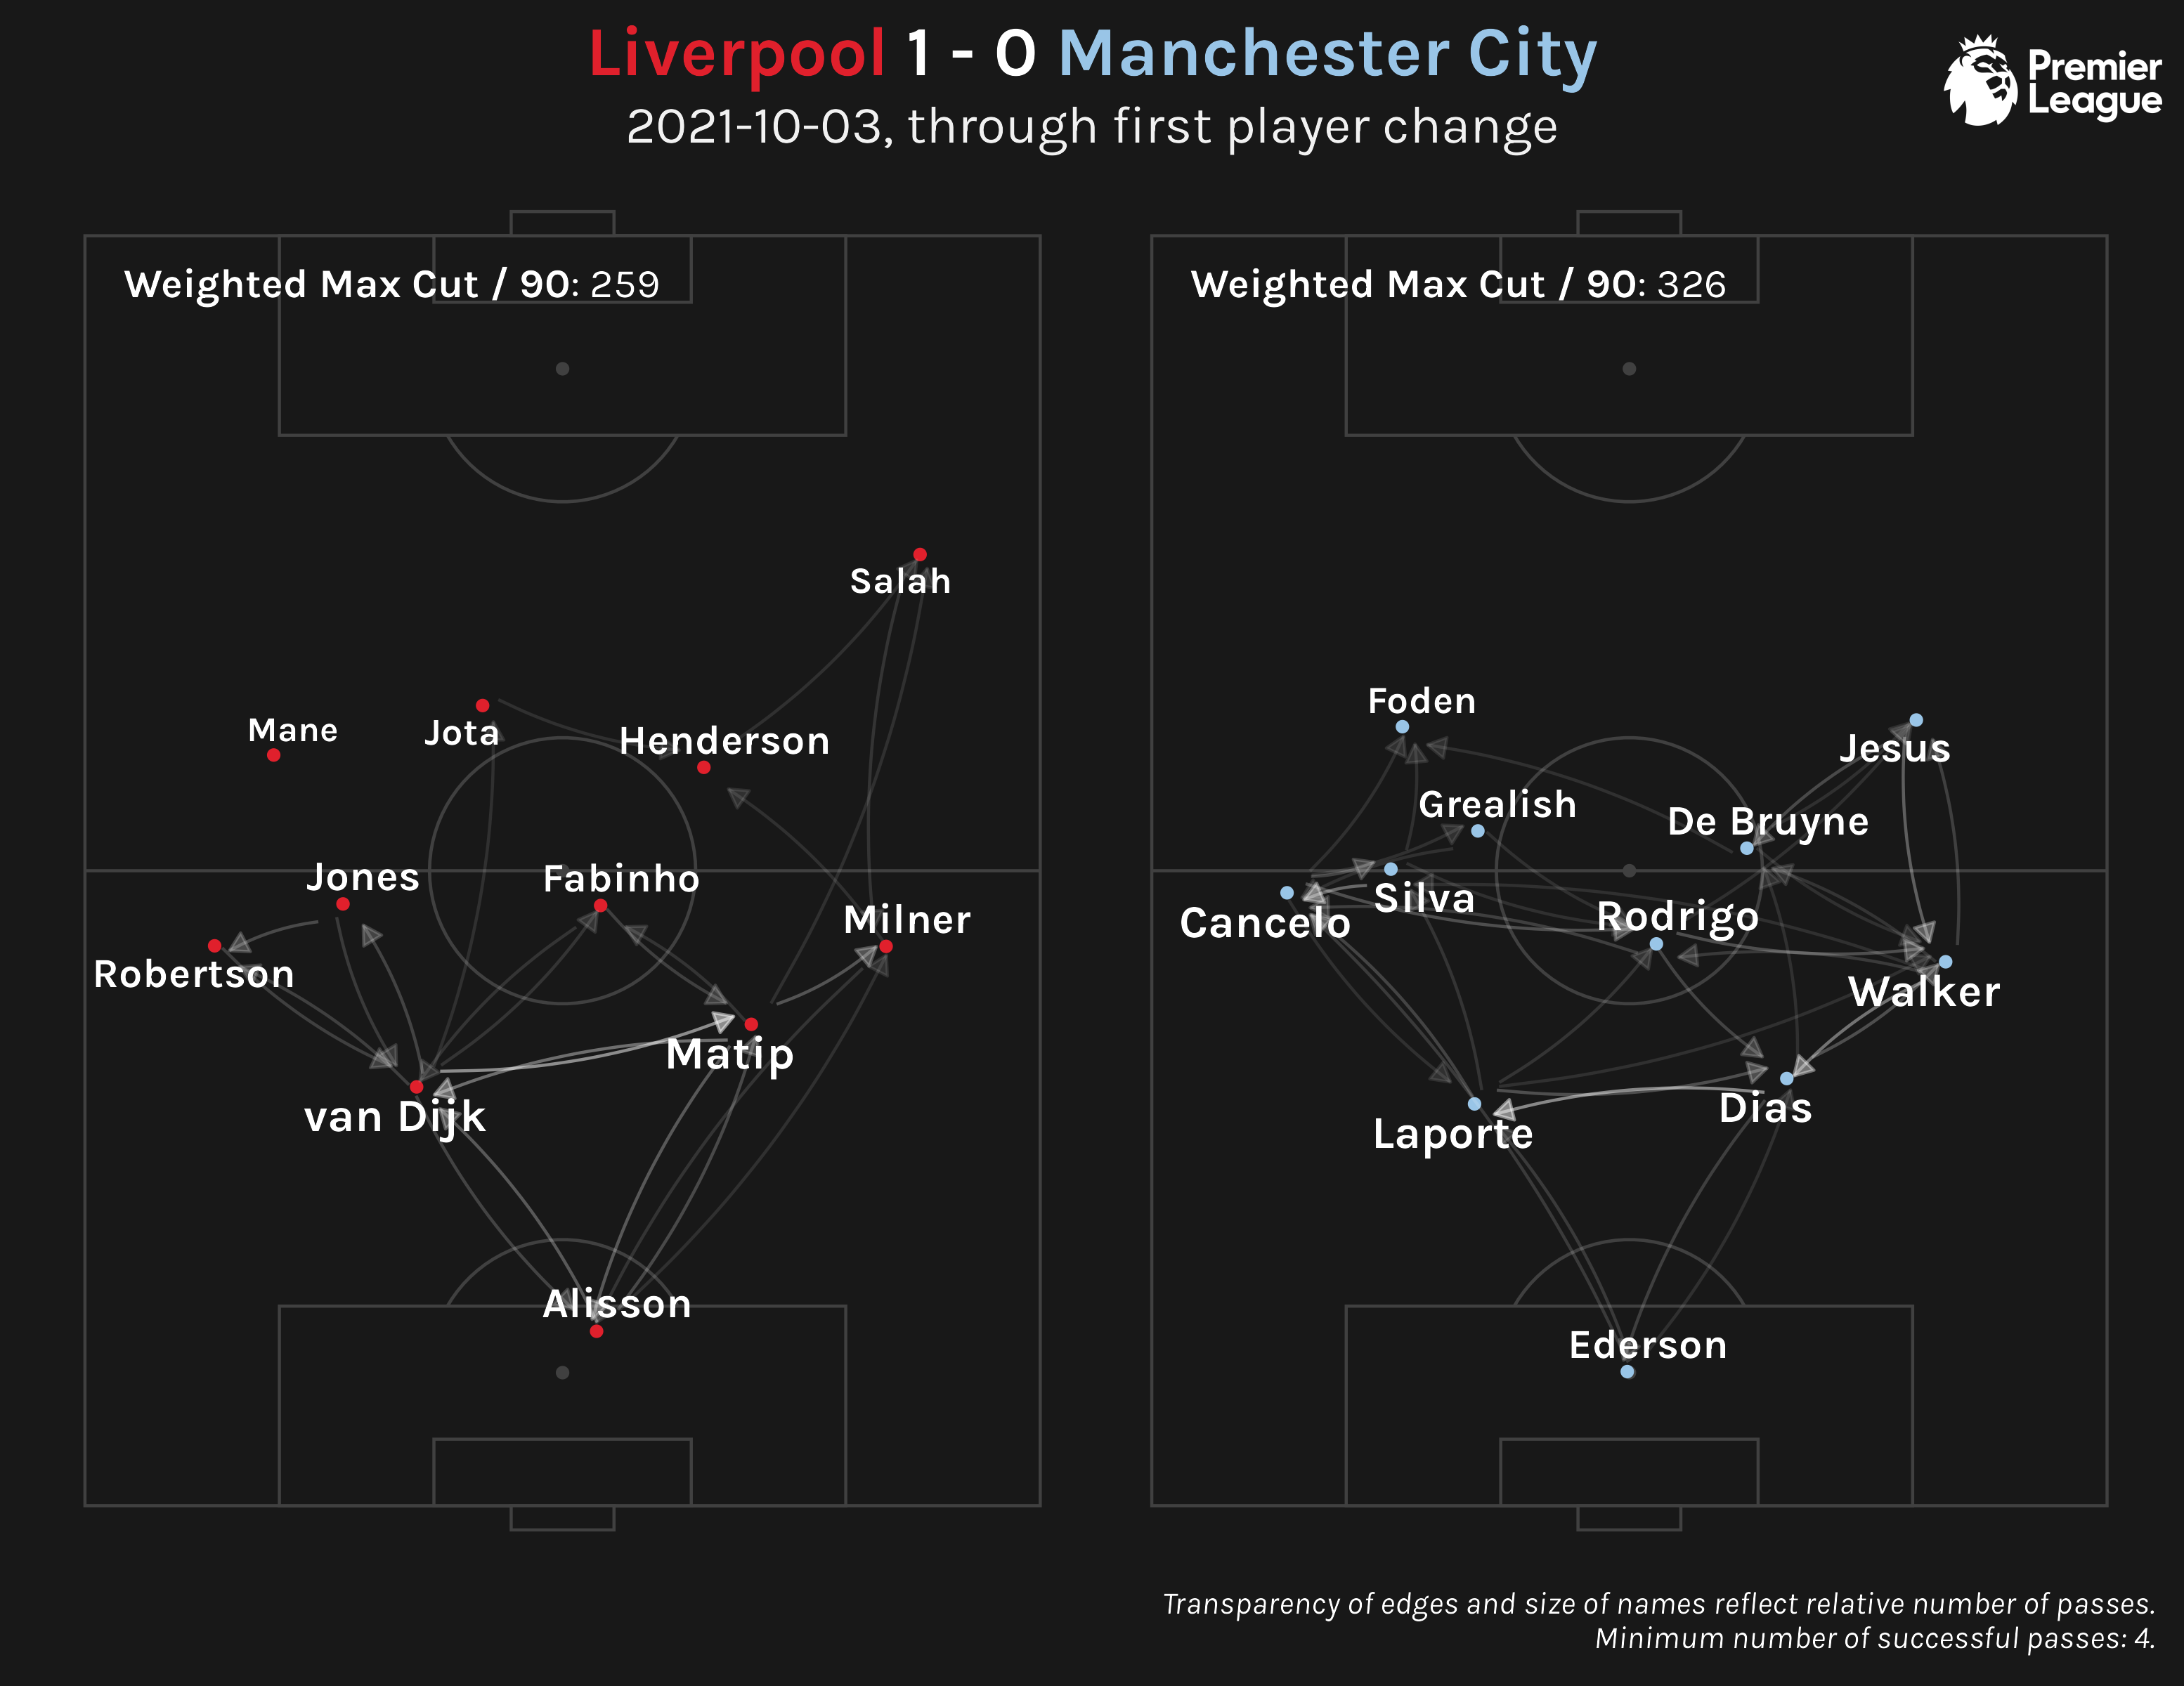 pass networks for Liverpool vs. Manchester City 2021-10-03 match, showing weighted max cut values